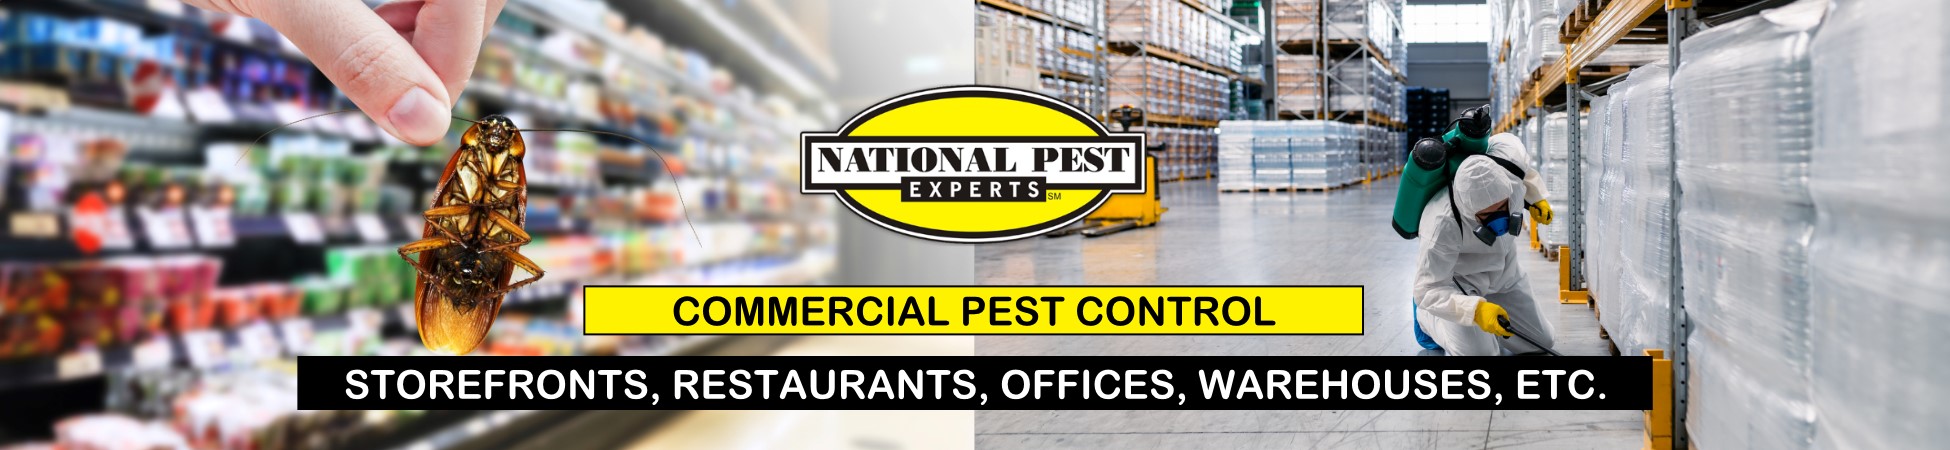 National Pest Experts - Commercial & Industrial exterminating and pest control in South Huntington, NY